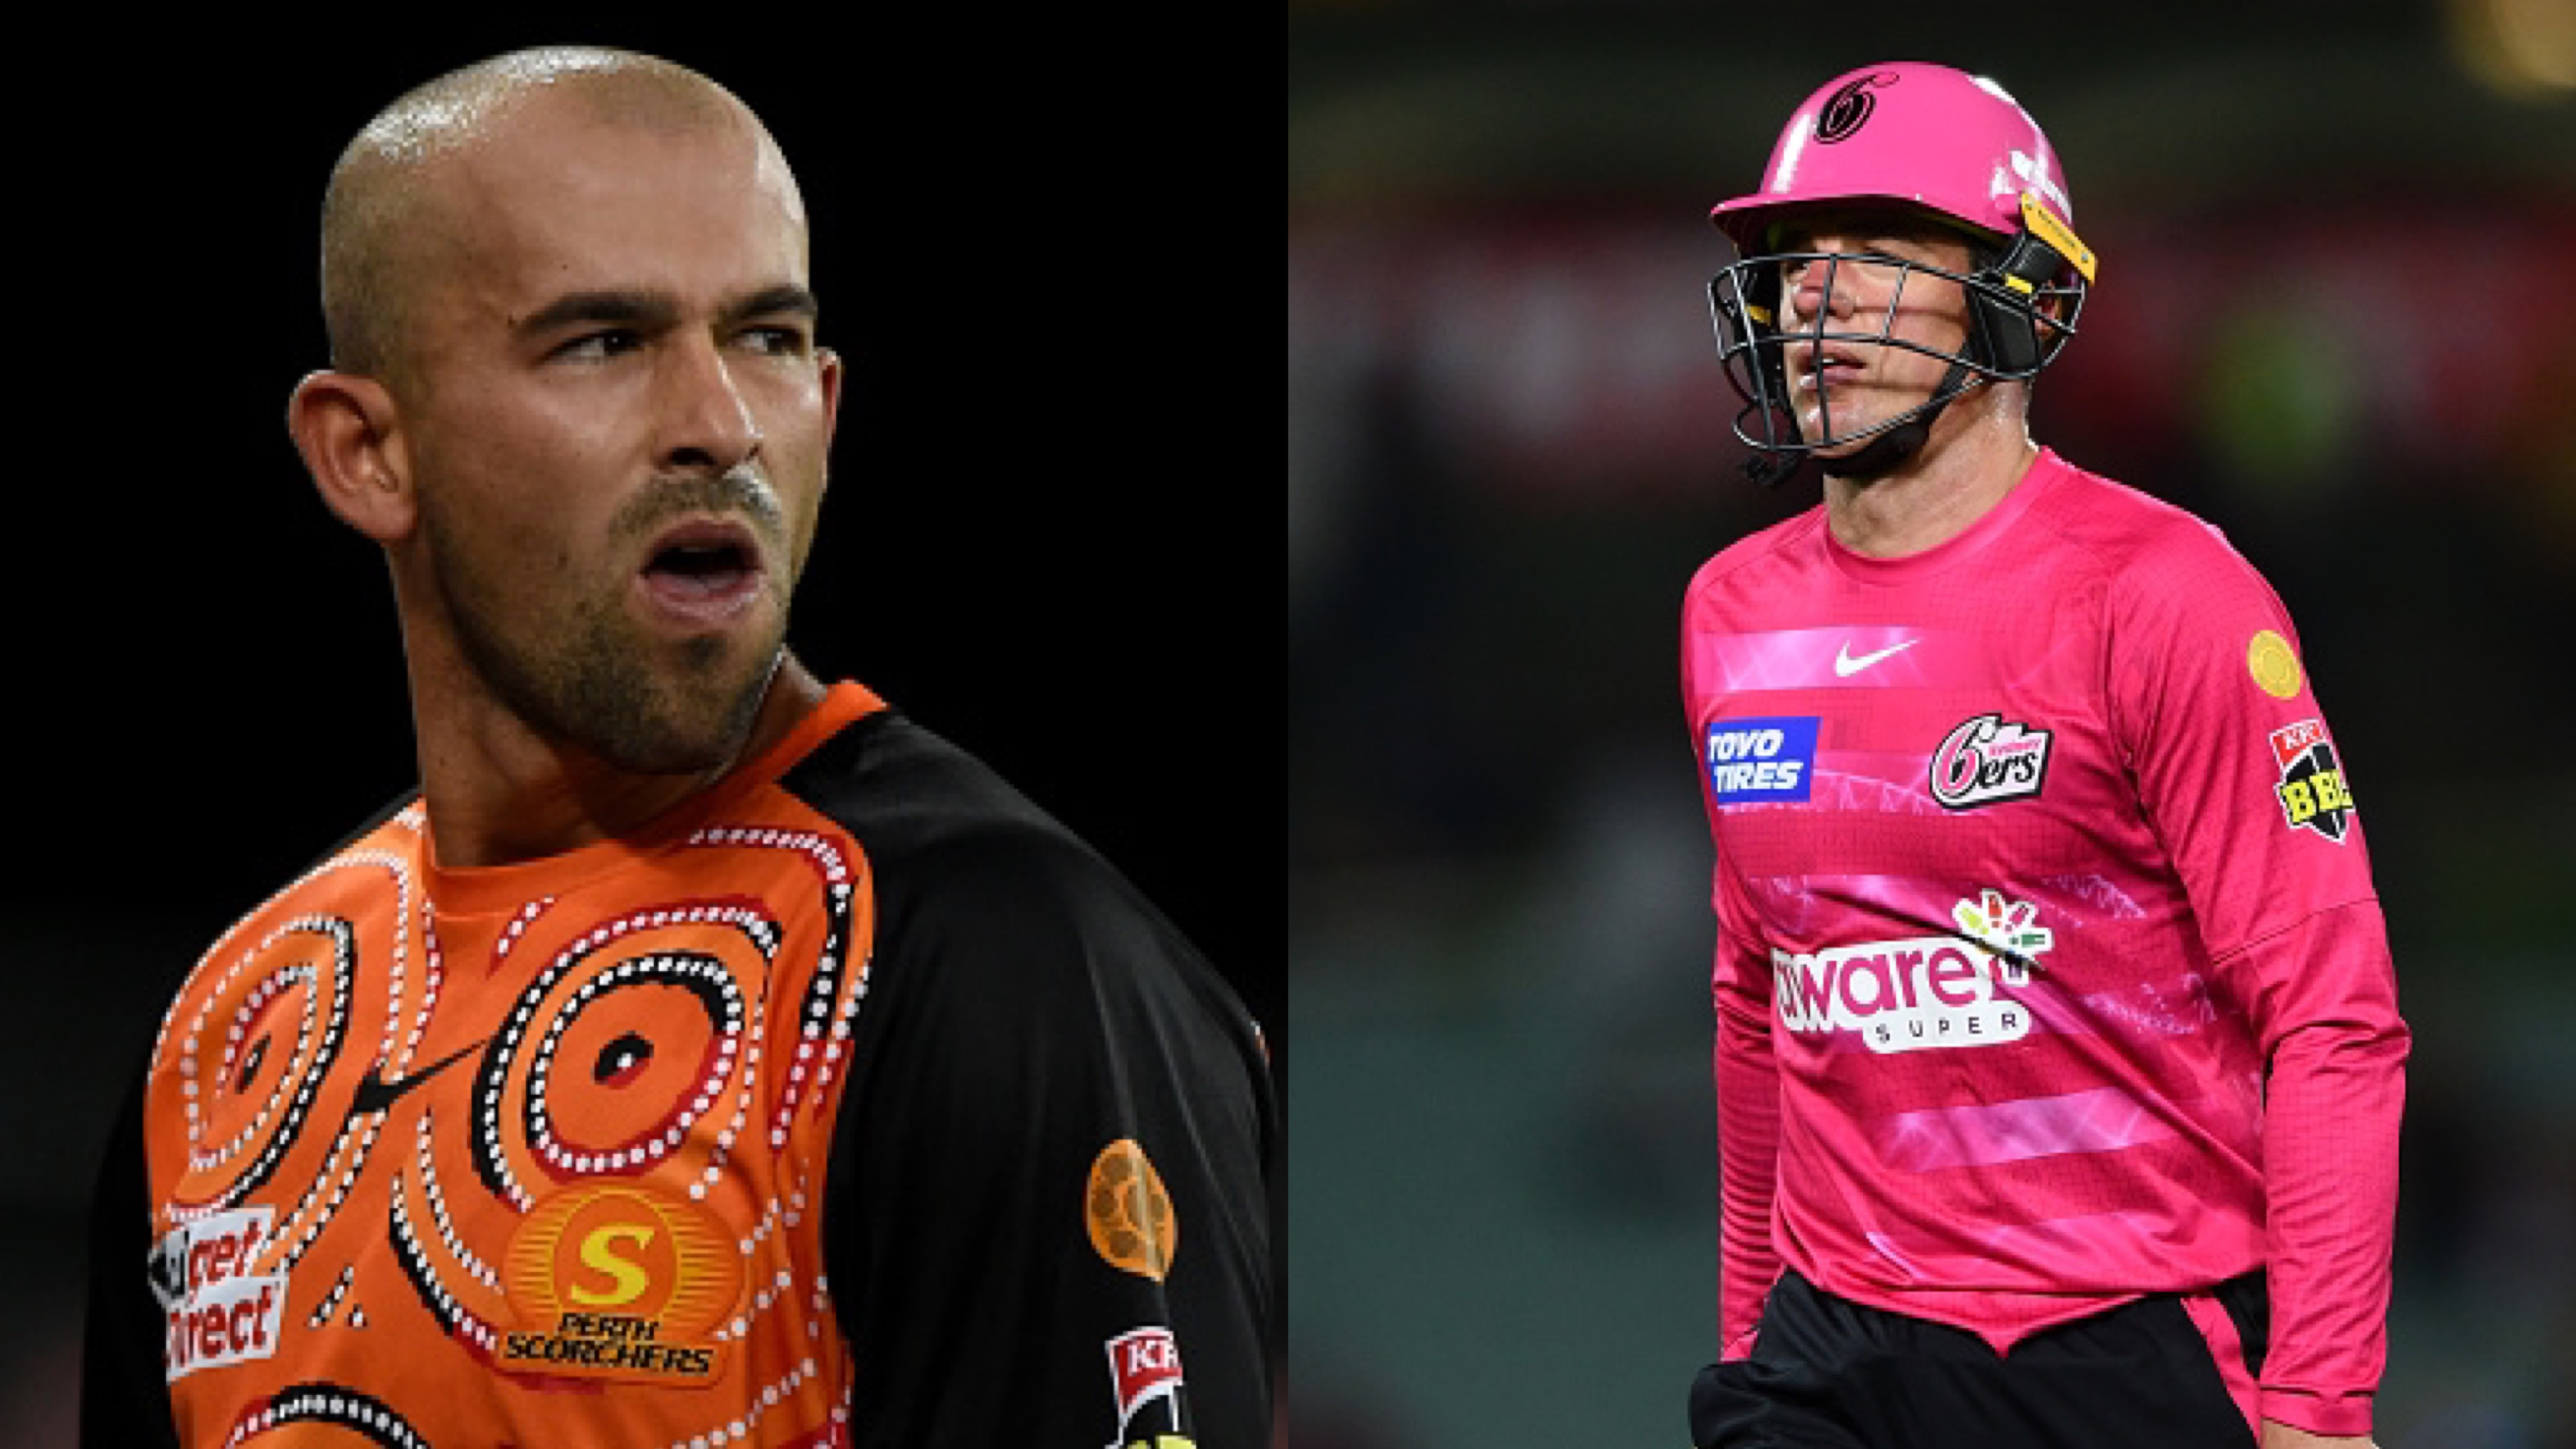 Rario D3 Predictions: Get your hands on exciting player cards for the Big Bash League (BBL) and win big prizes